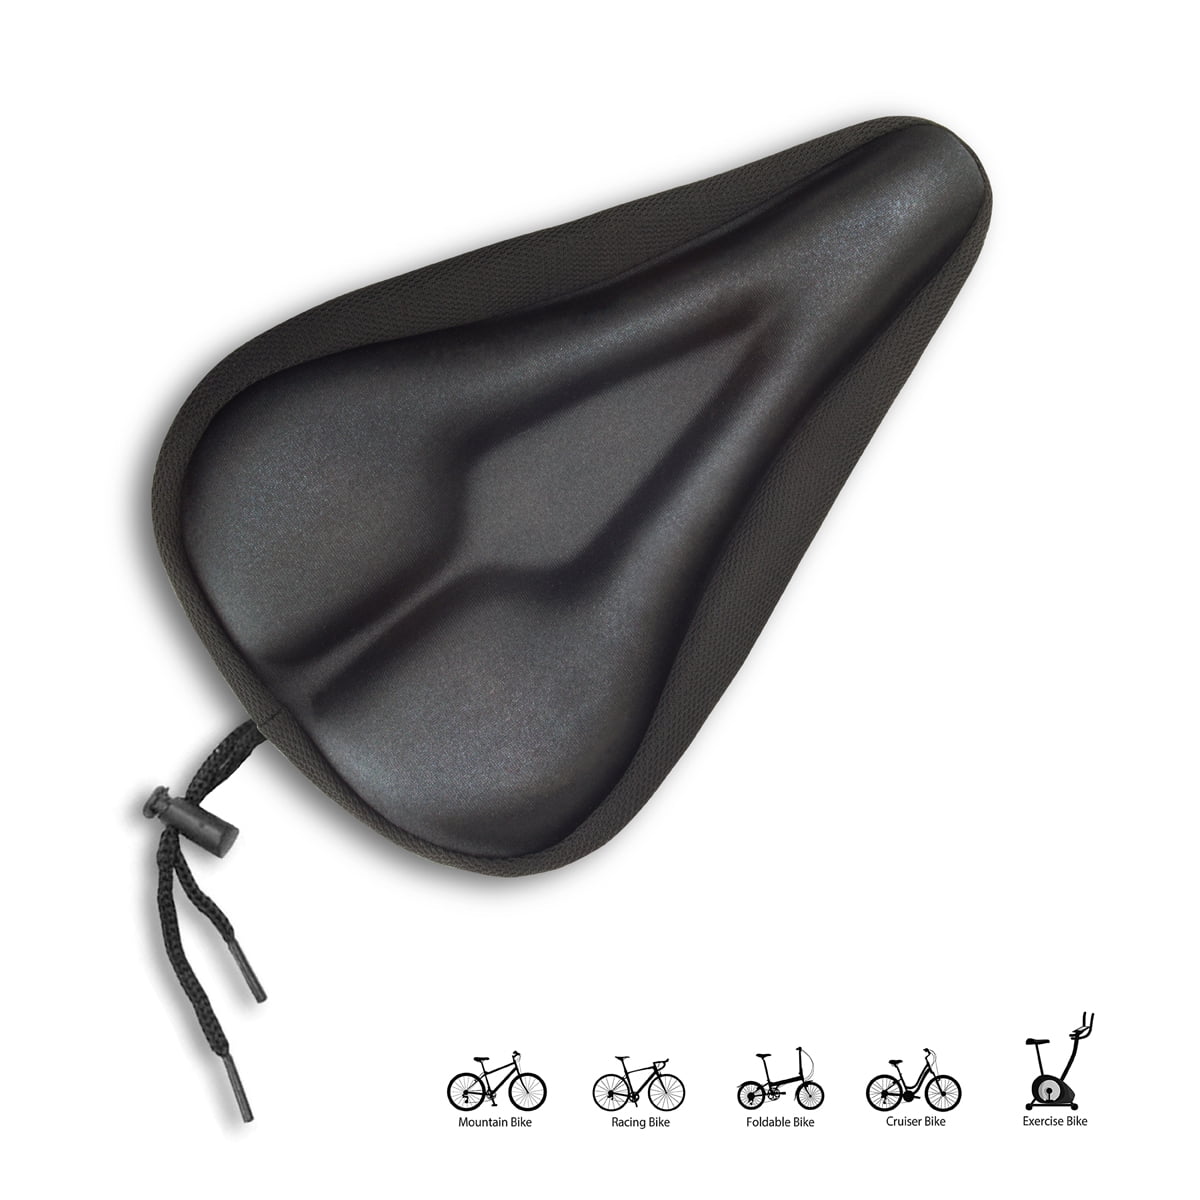 Bike Soft Comfort Foam Padded Comfy Cushion Saddle Seat Cover Bicycle Cycle 